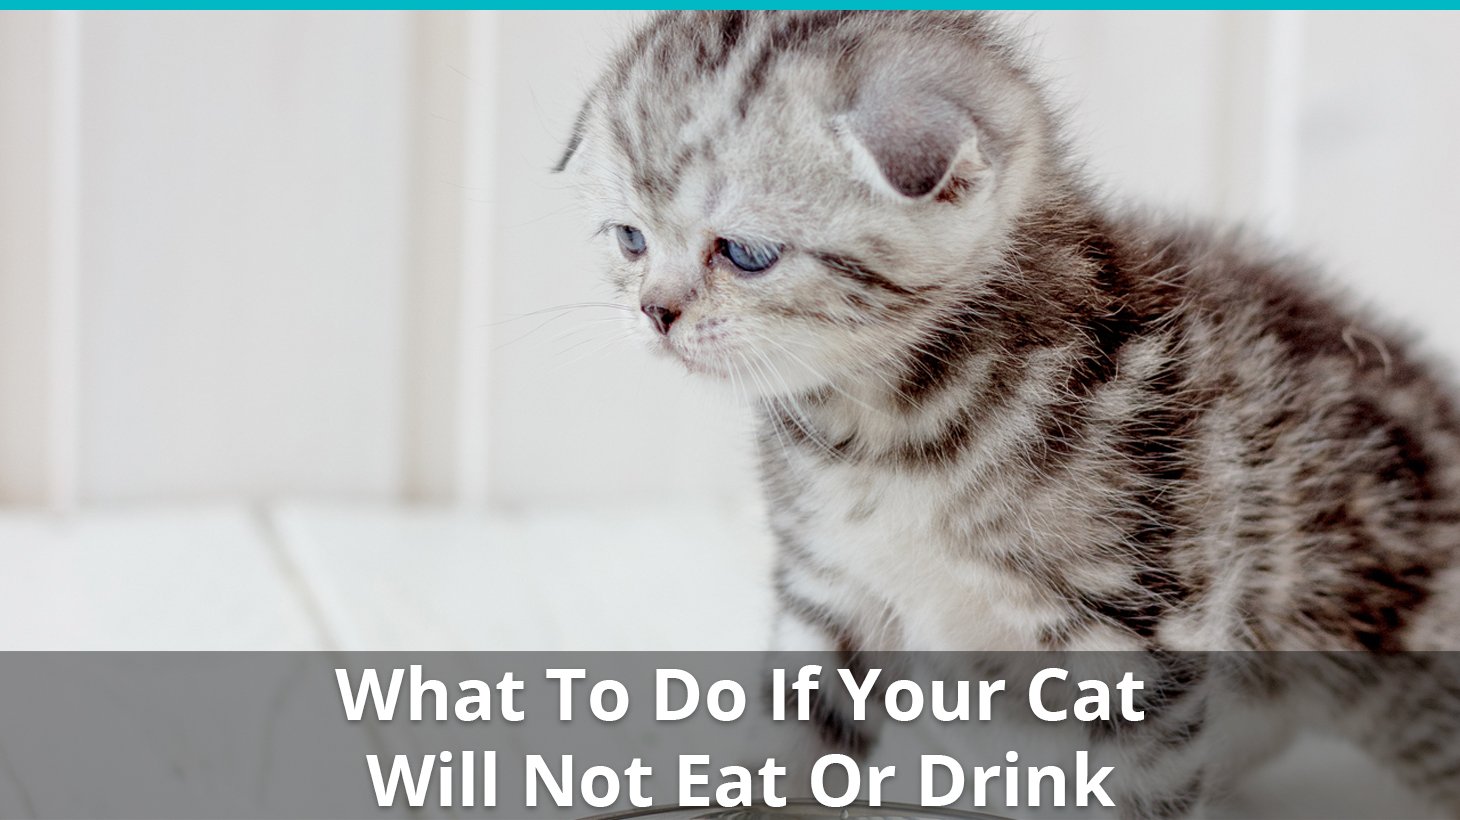 Help! My Cat Won't Eat Or Drink! What To Do When Kitty Refuses